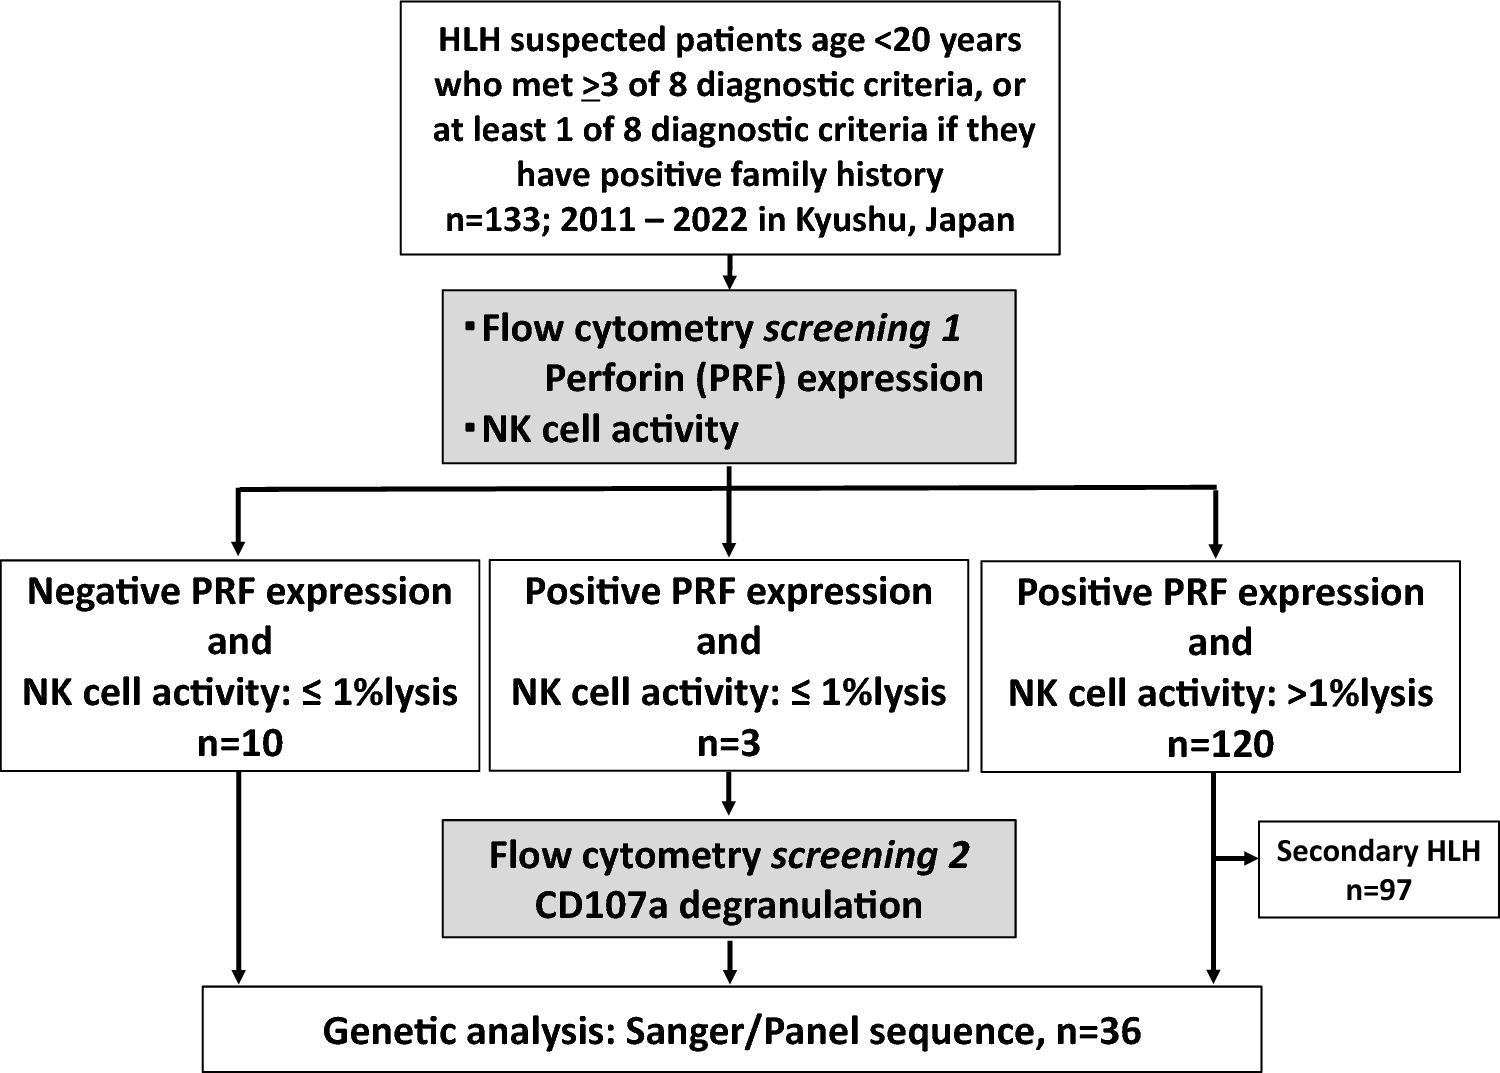 Early hematopoietic cell transplantation for familial hemophagocytic lymphohistiocytosis in a regional treatment network in Japan